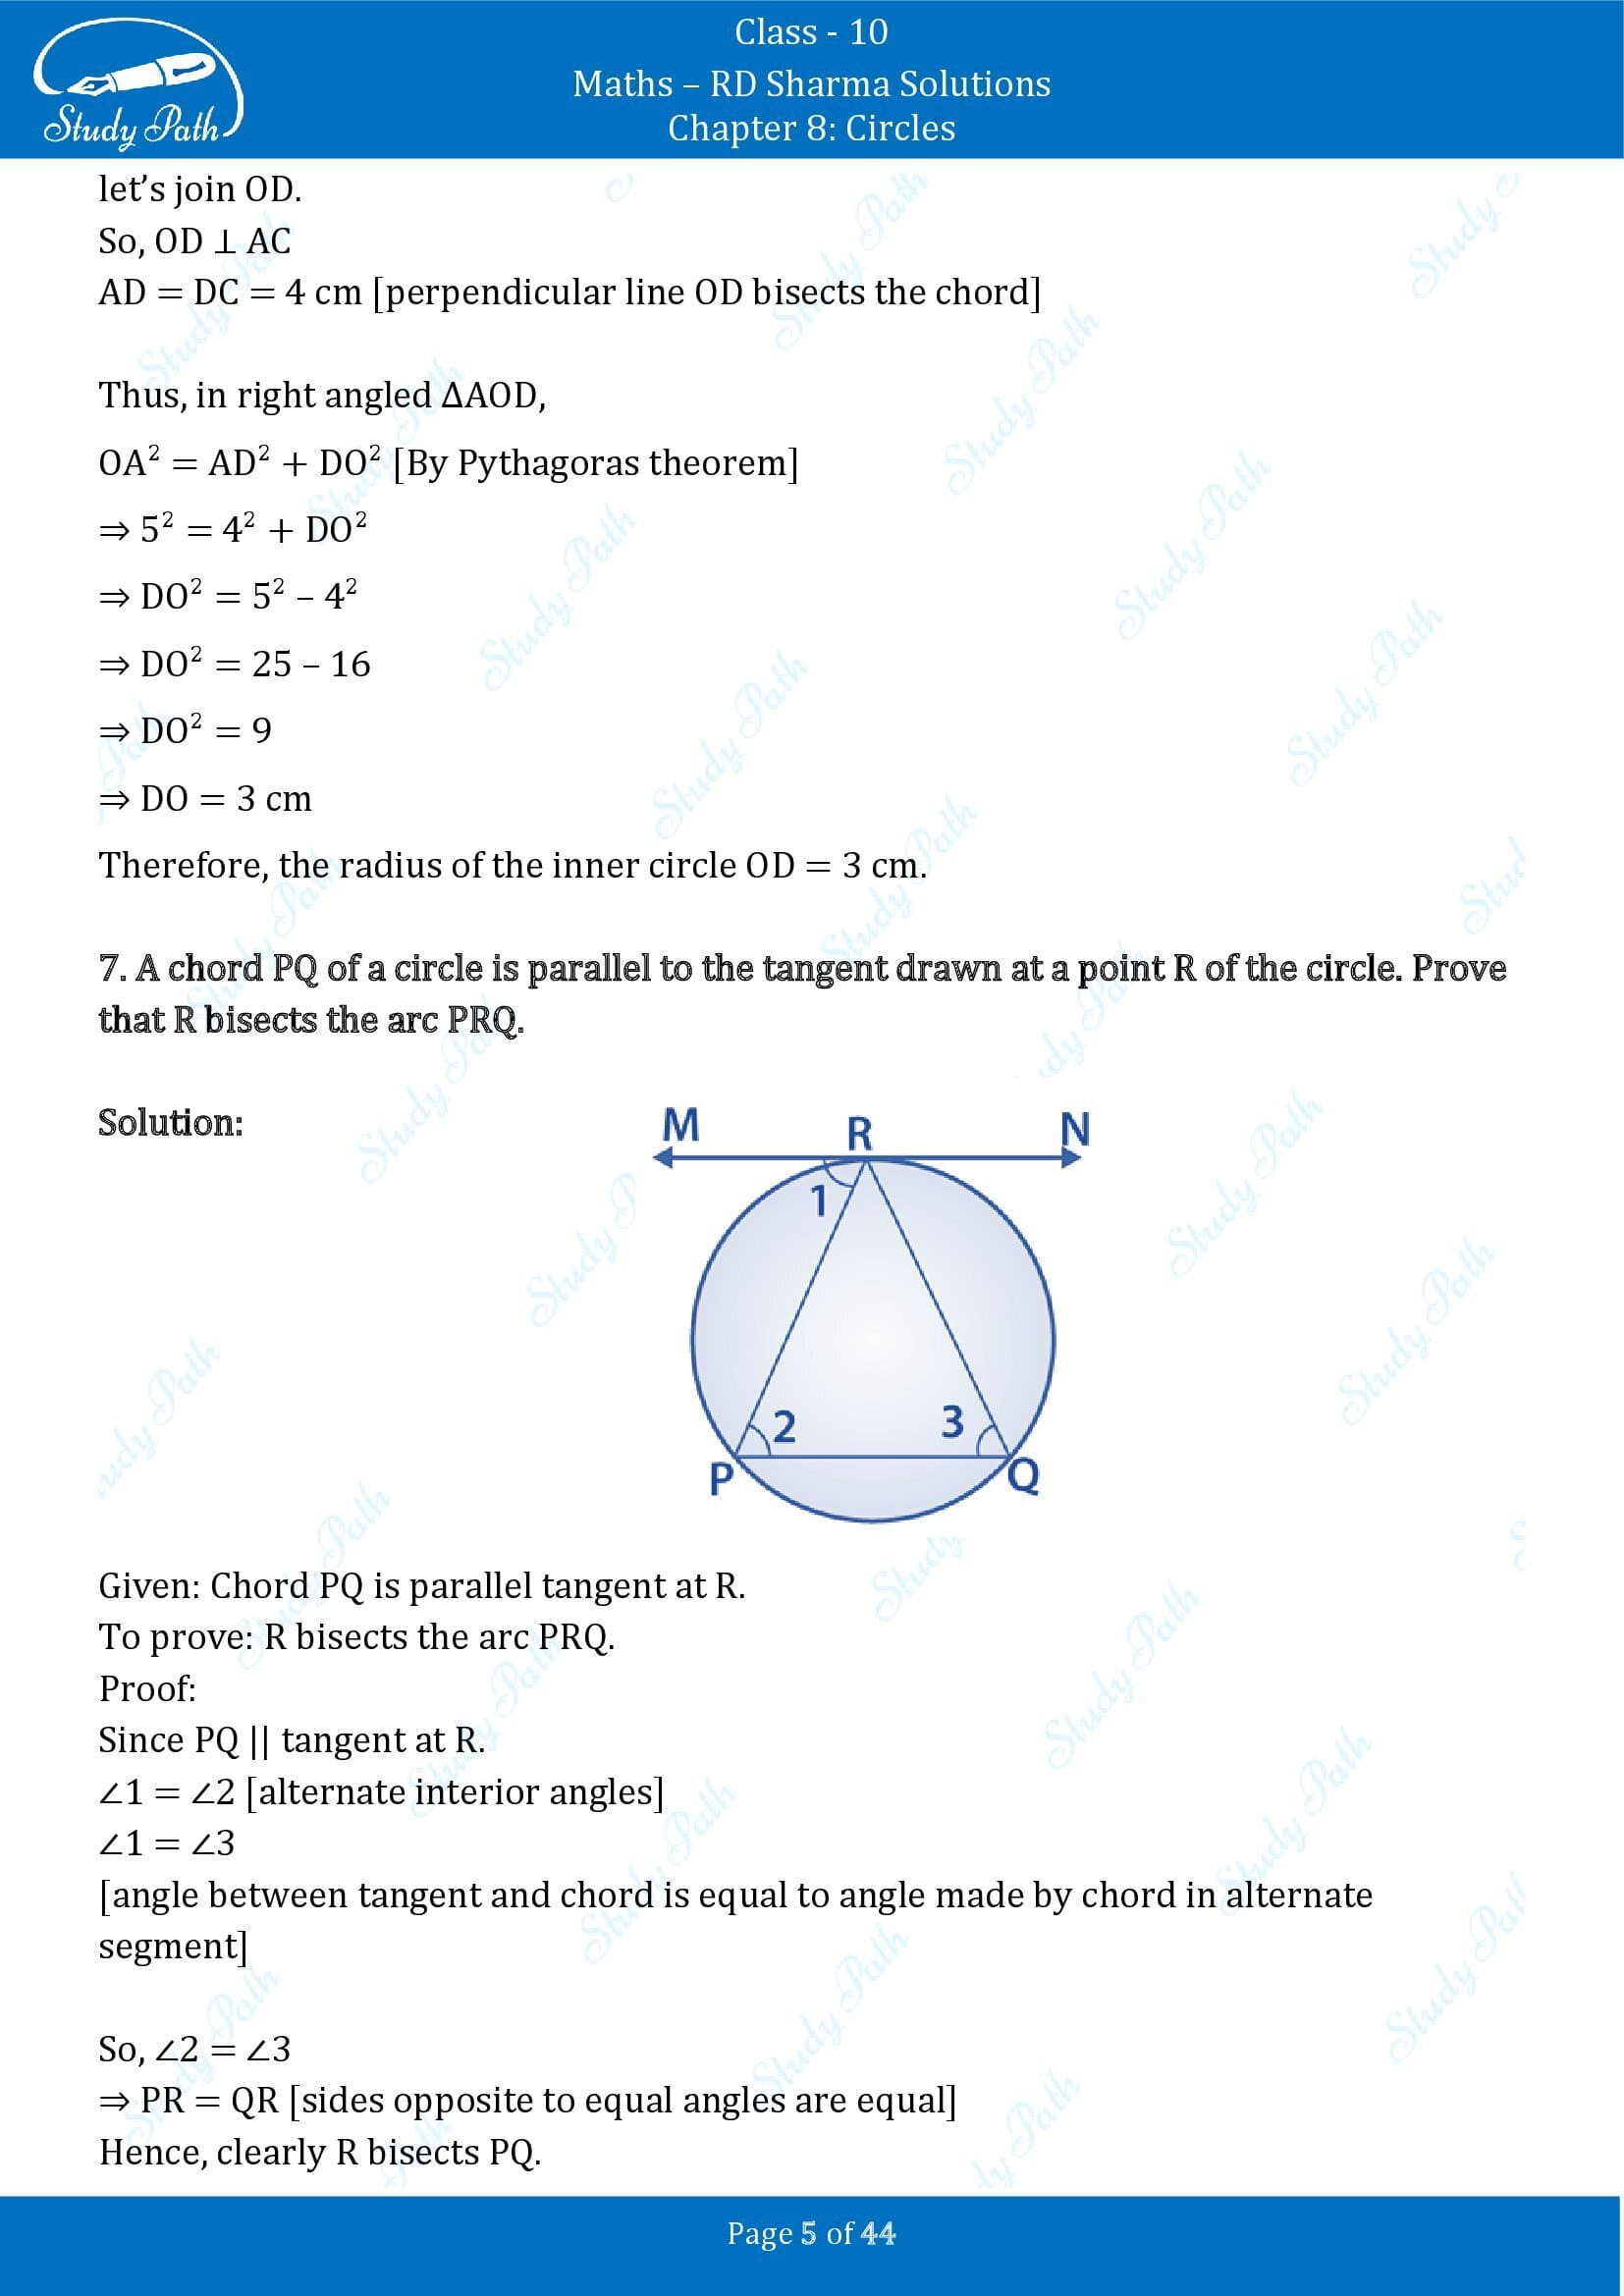 RD Sharma Solutions Class 10 Chapter 8 Circles Exercise 8.2 00005